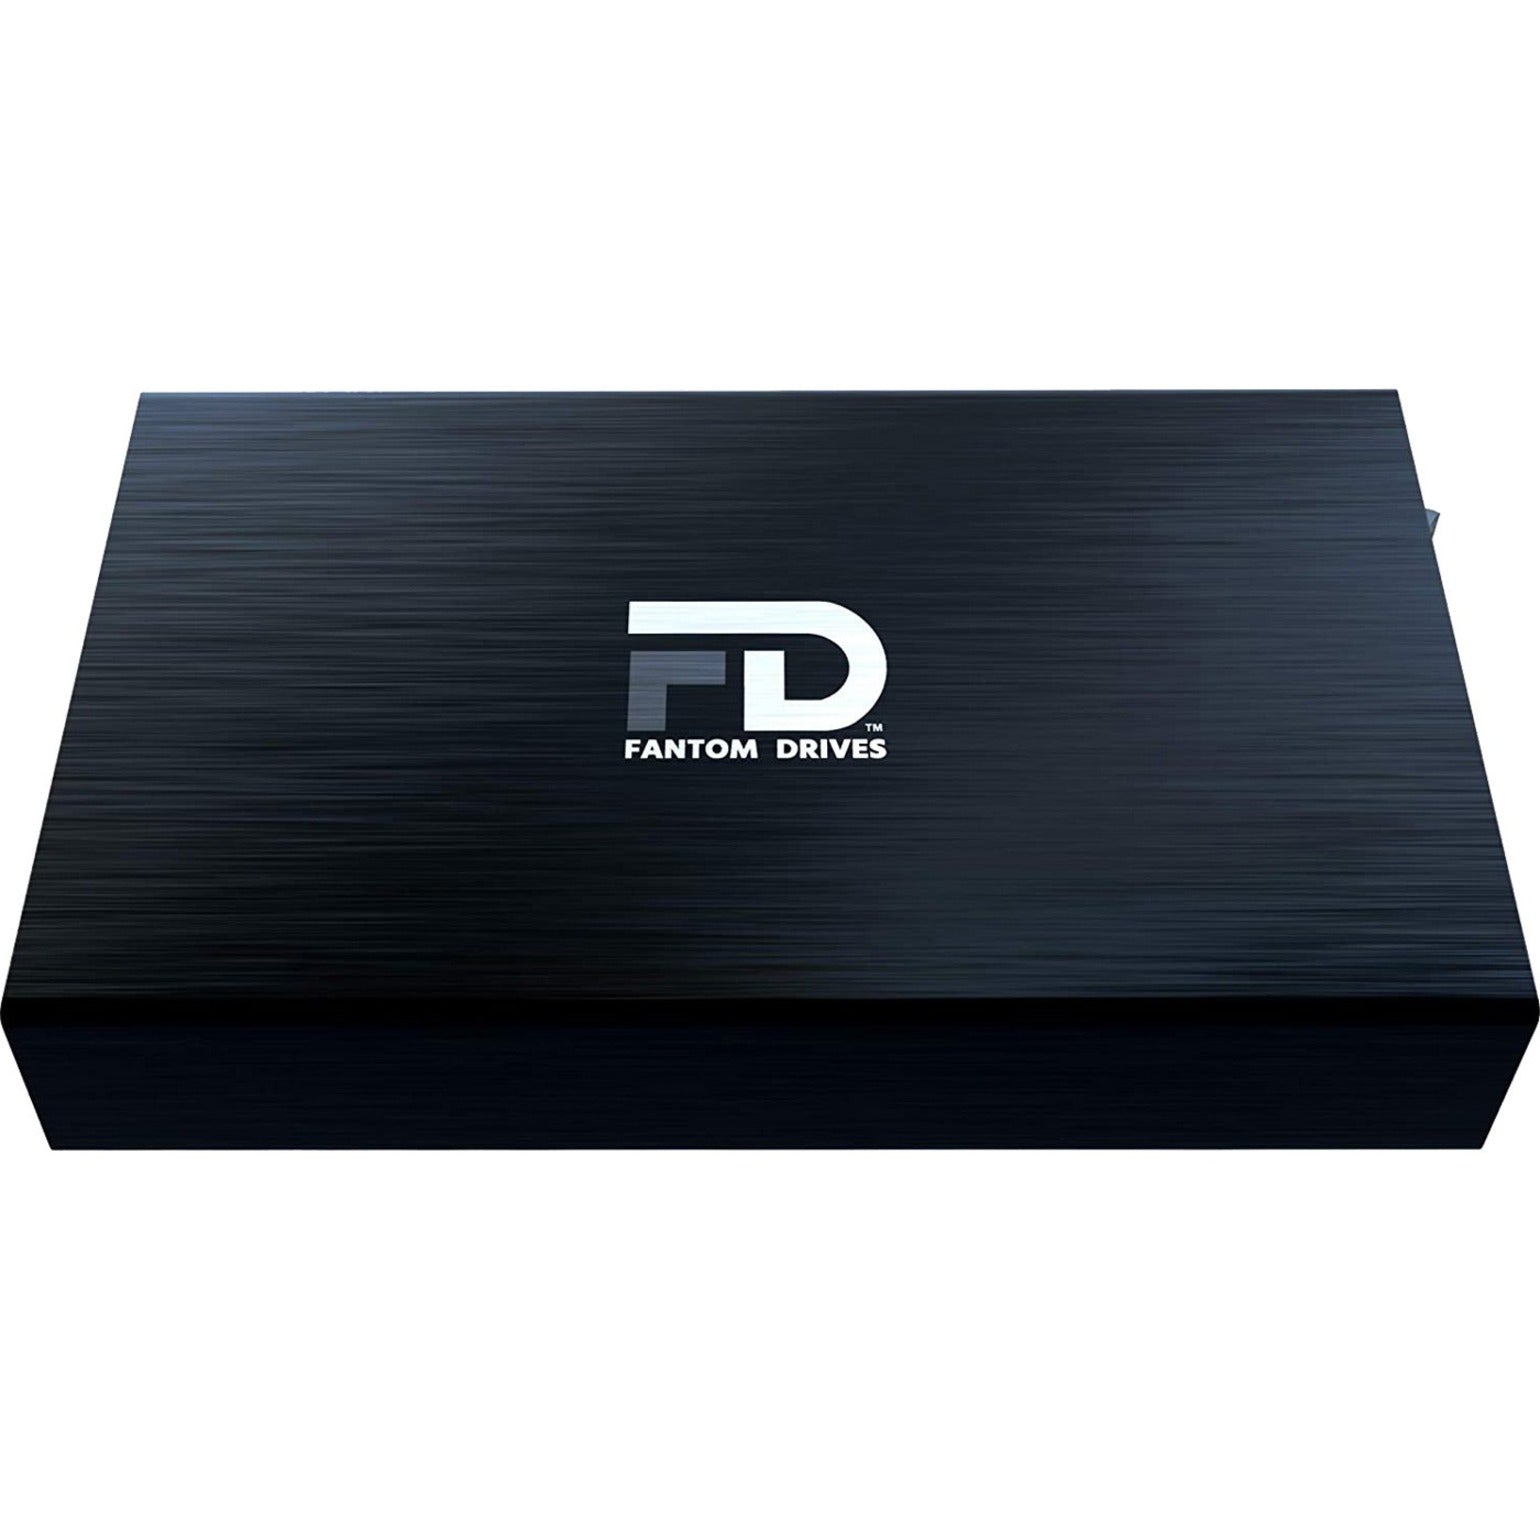 Fantom Drives GFP1000EU3 GFORCE 1TB 7200RPM External Hard Drive - USB 3.2 Gen 1 & eSATA - Black, 1 Year Warranty, Compatible with PlayStation 4 and Xbox Gaming Consoles